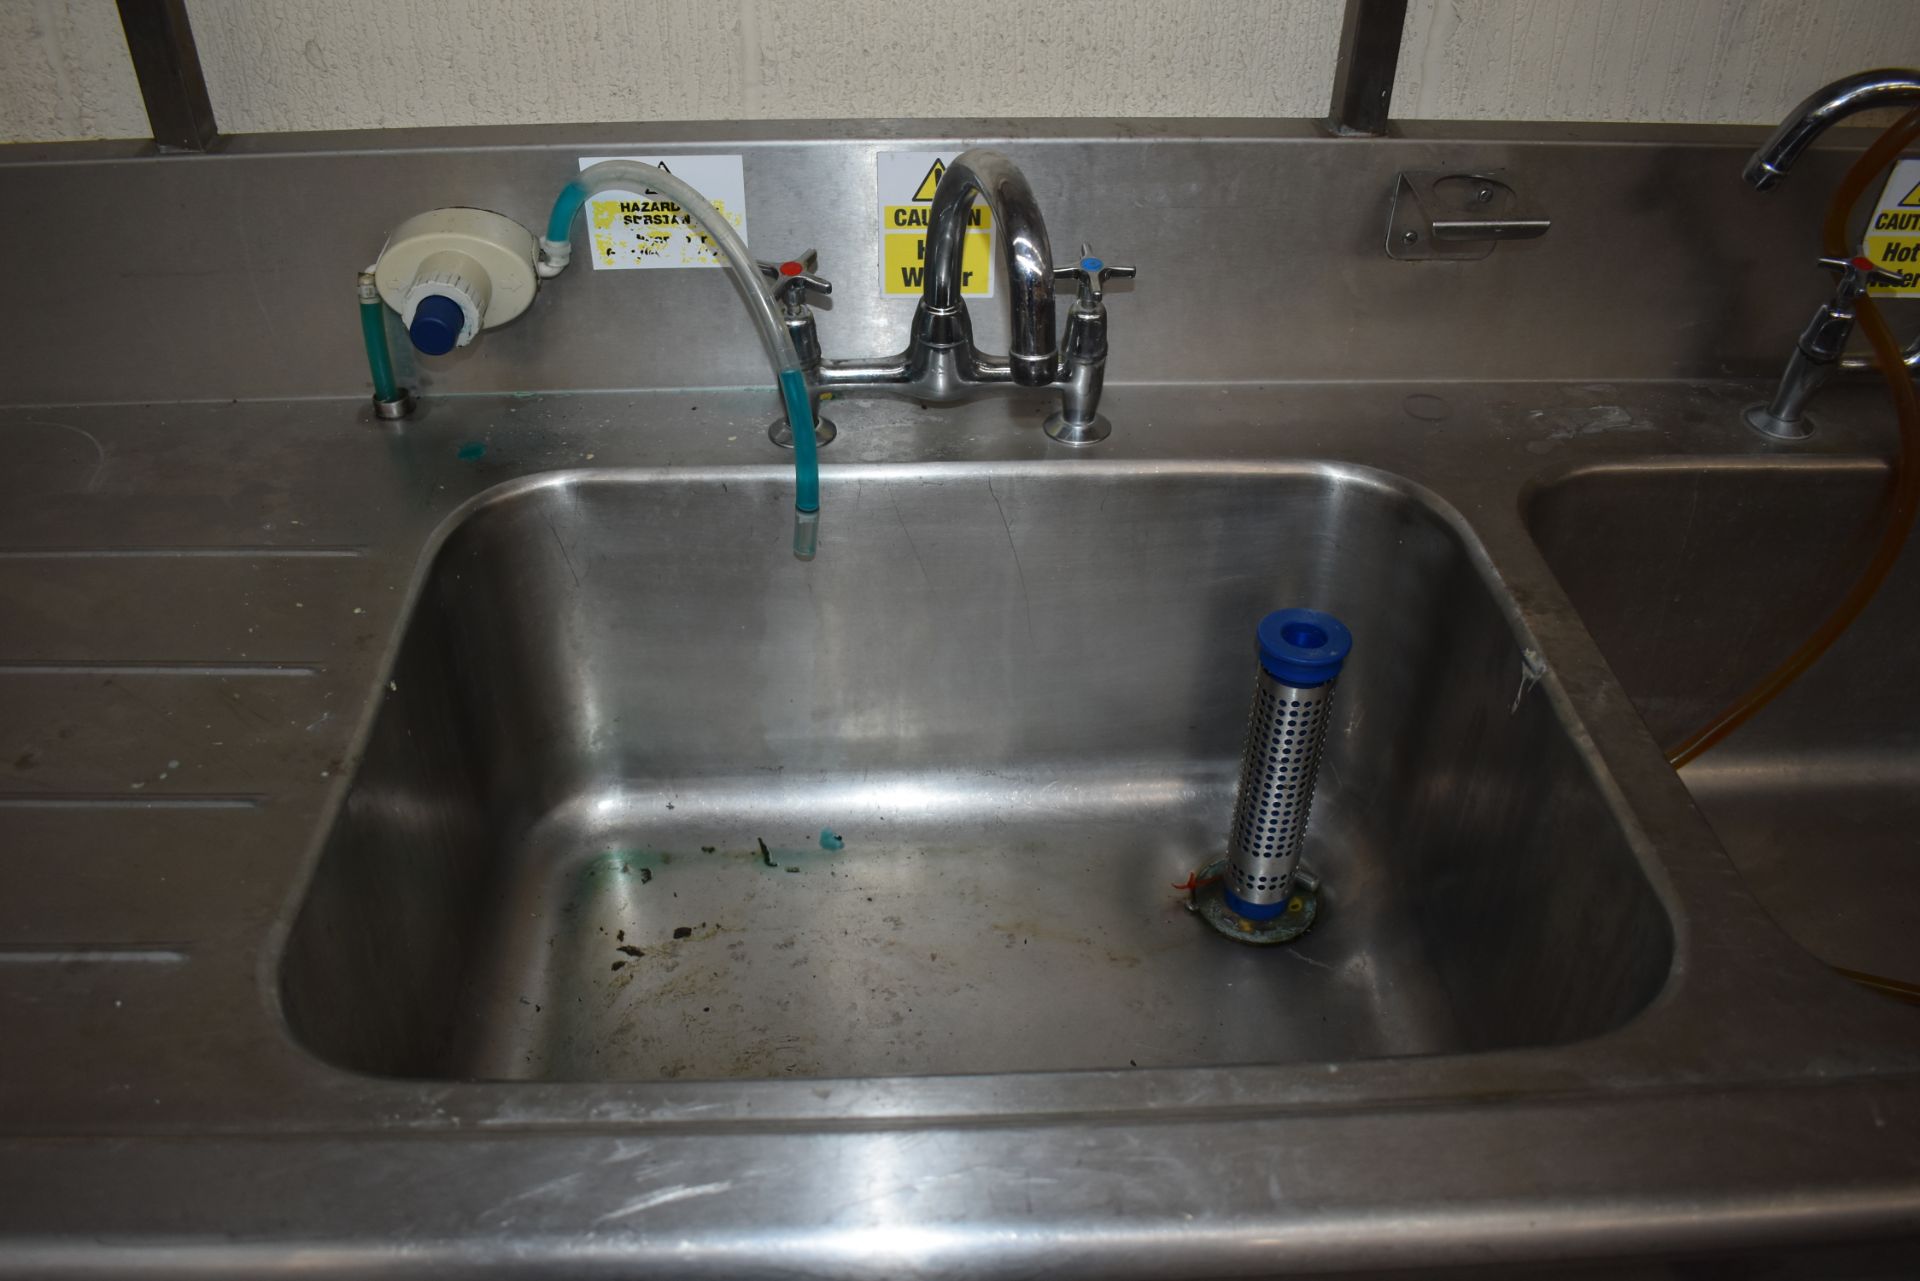 1 x Stainless Steel Commercial Wash Basin Unit With Twin Sink Bowl, Mixer Taps, Undershelf, Upstands - Image 3 of 8